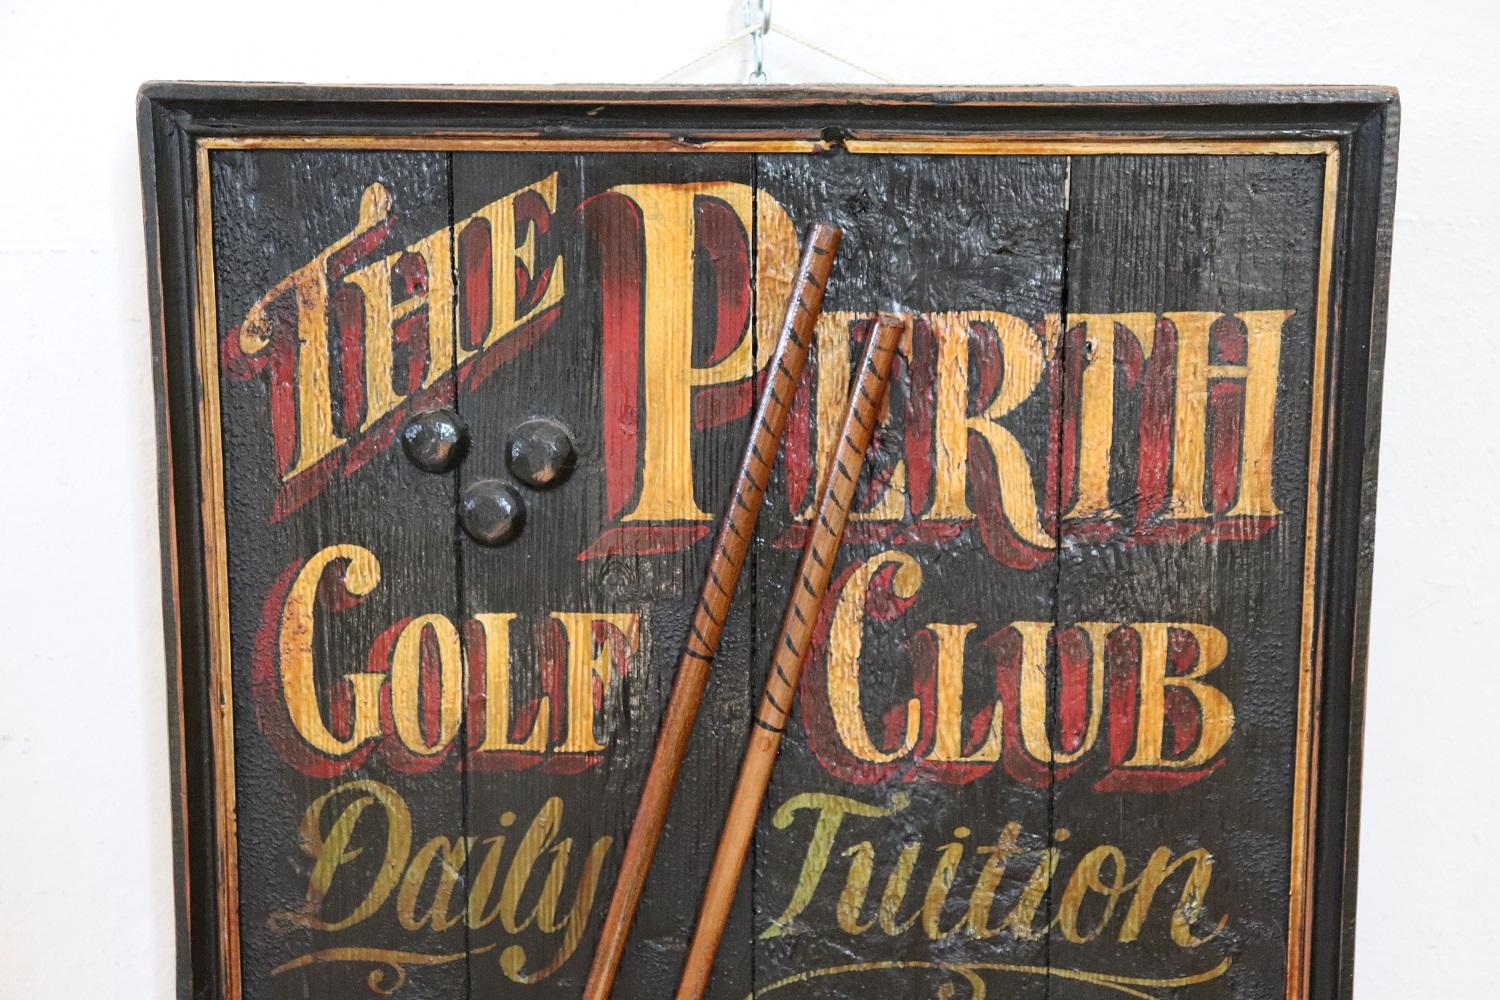 This vintage sign for collectors is truly special. Made of wood with relief decorations and hand painted. The sign was dedicated to the historic Perth golf club.